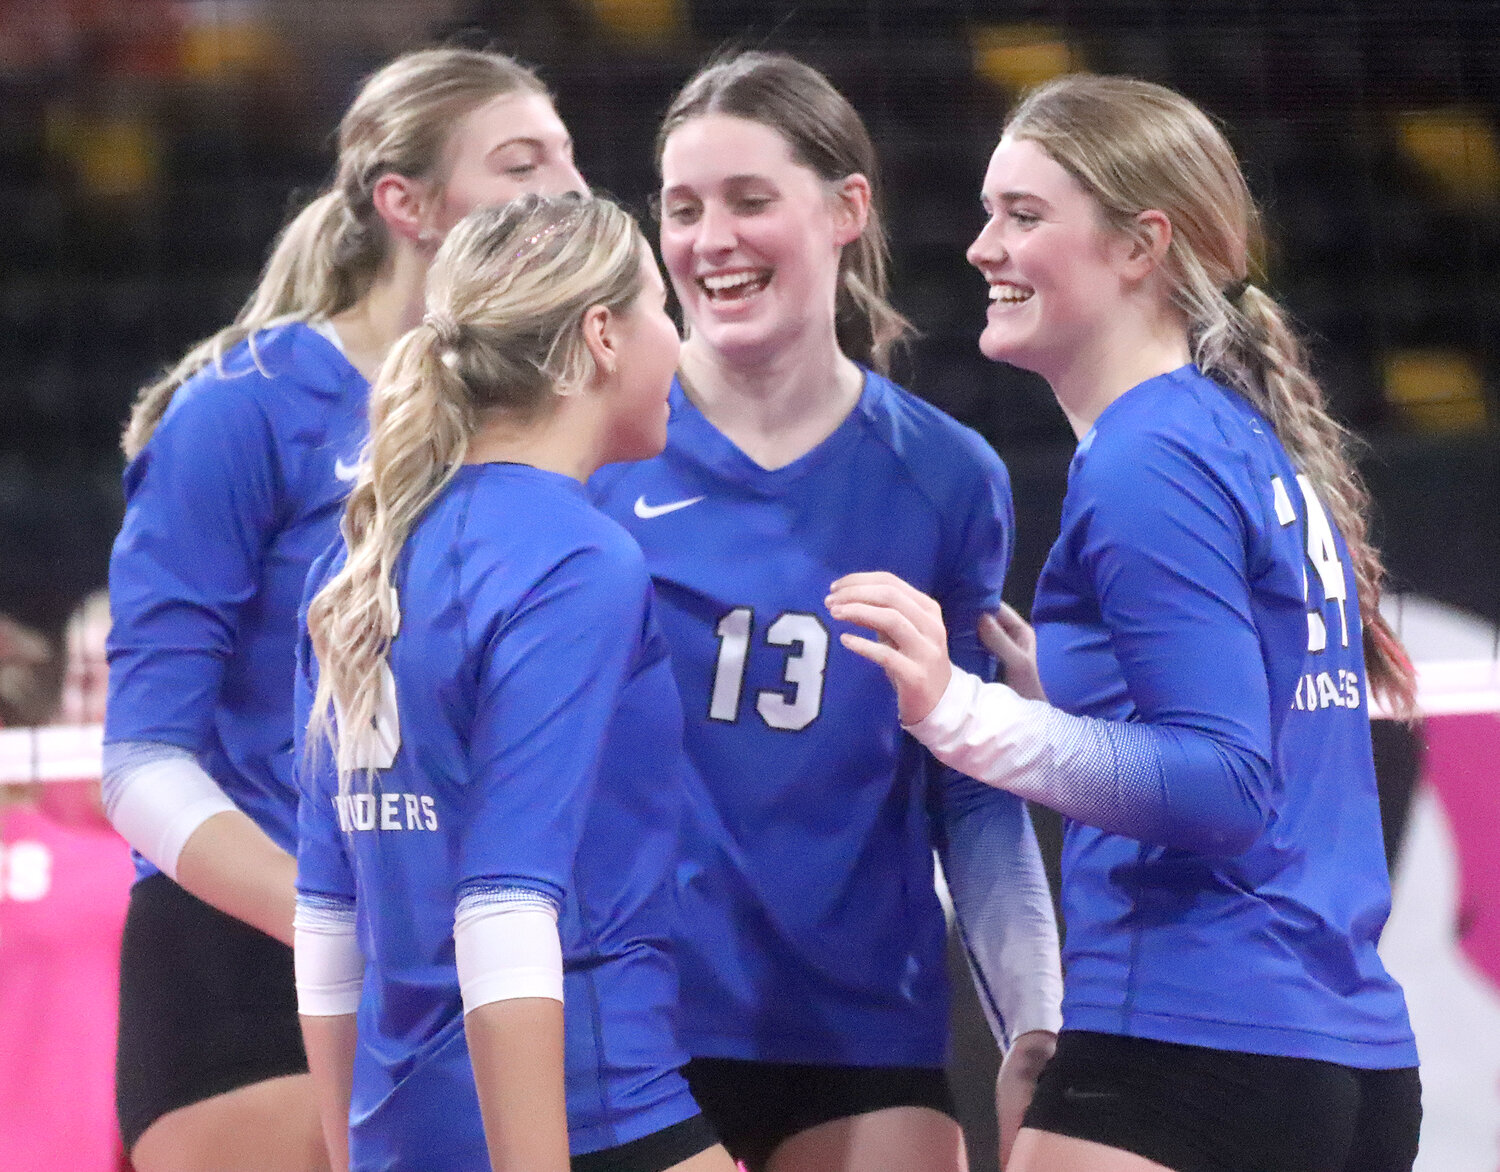 The Holy Trinity Catholic Crusaders celebrate after a point in the third set. HTC downed No. 6 Don Bosco 25-21, 25-17, 25-21 to advance to the Class 1A semifinals Wednesday night.